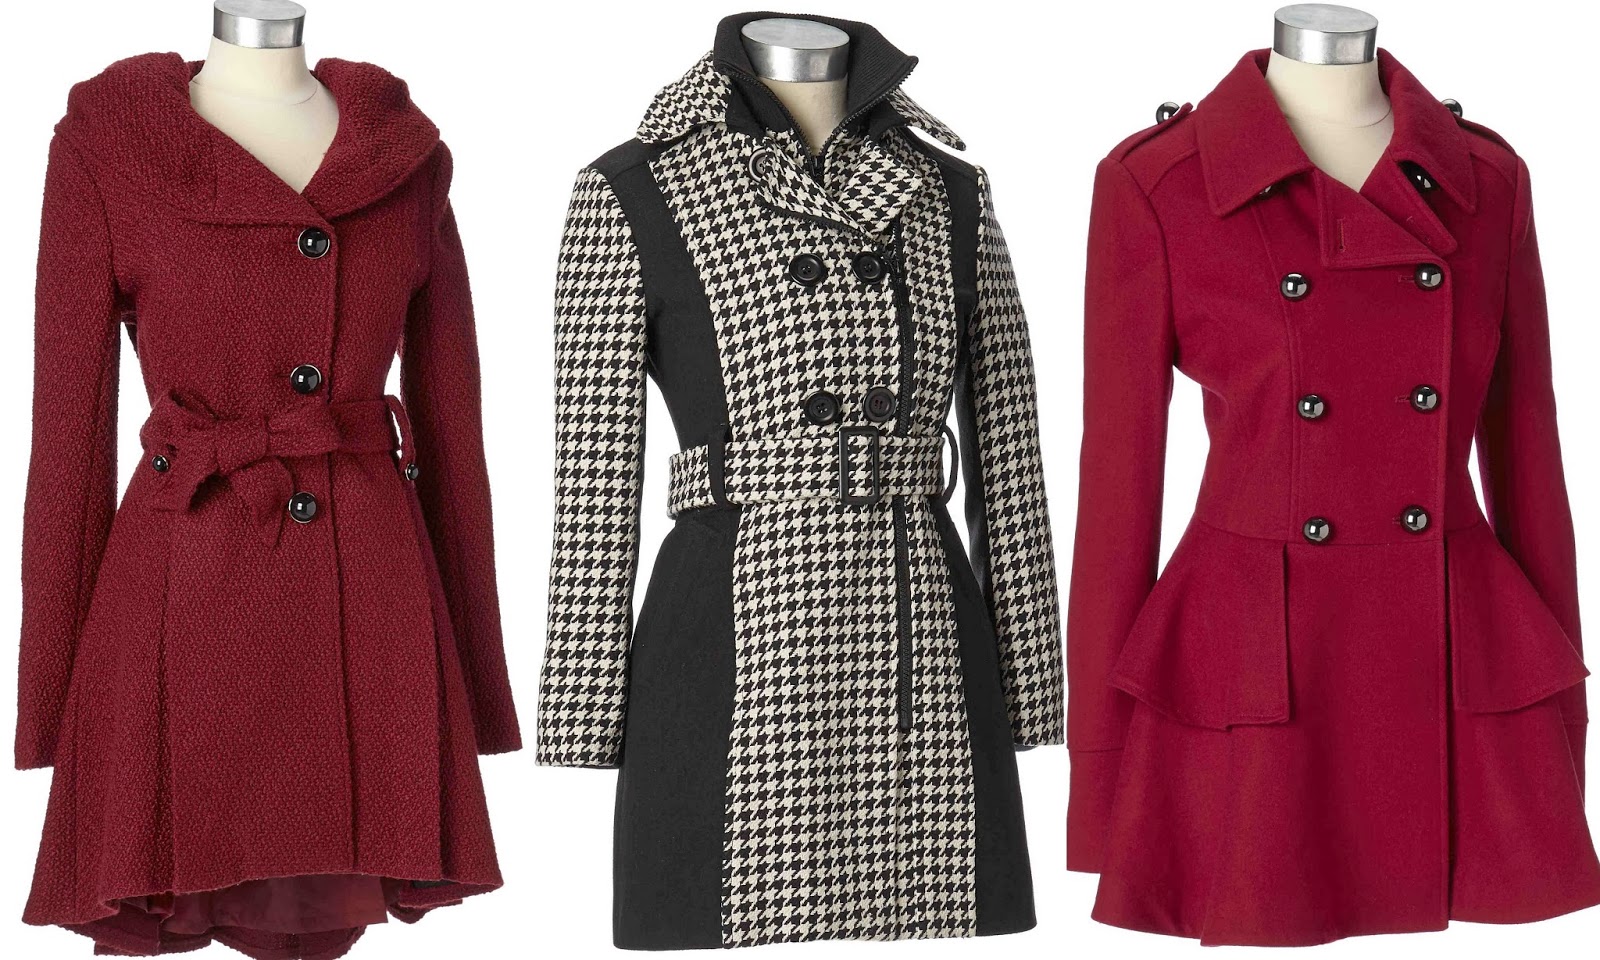 Burlington Coat Factory Winter Clothing ~ New Jackets Coats $ Prices ~ Shop  With Me 2019 